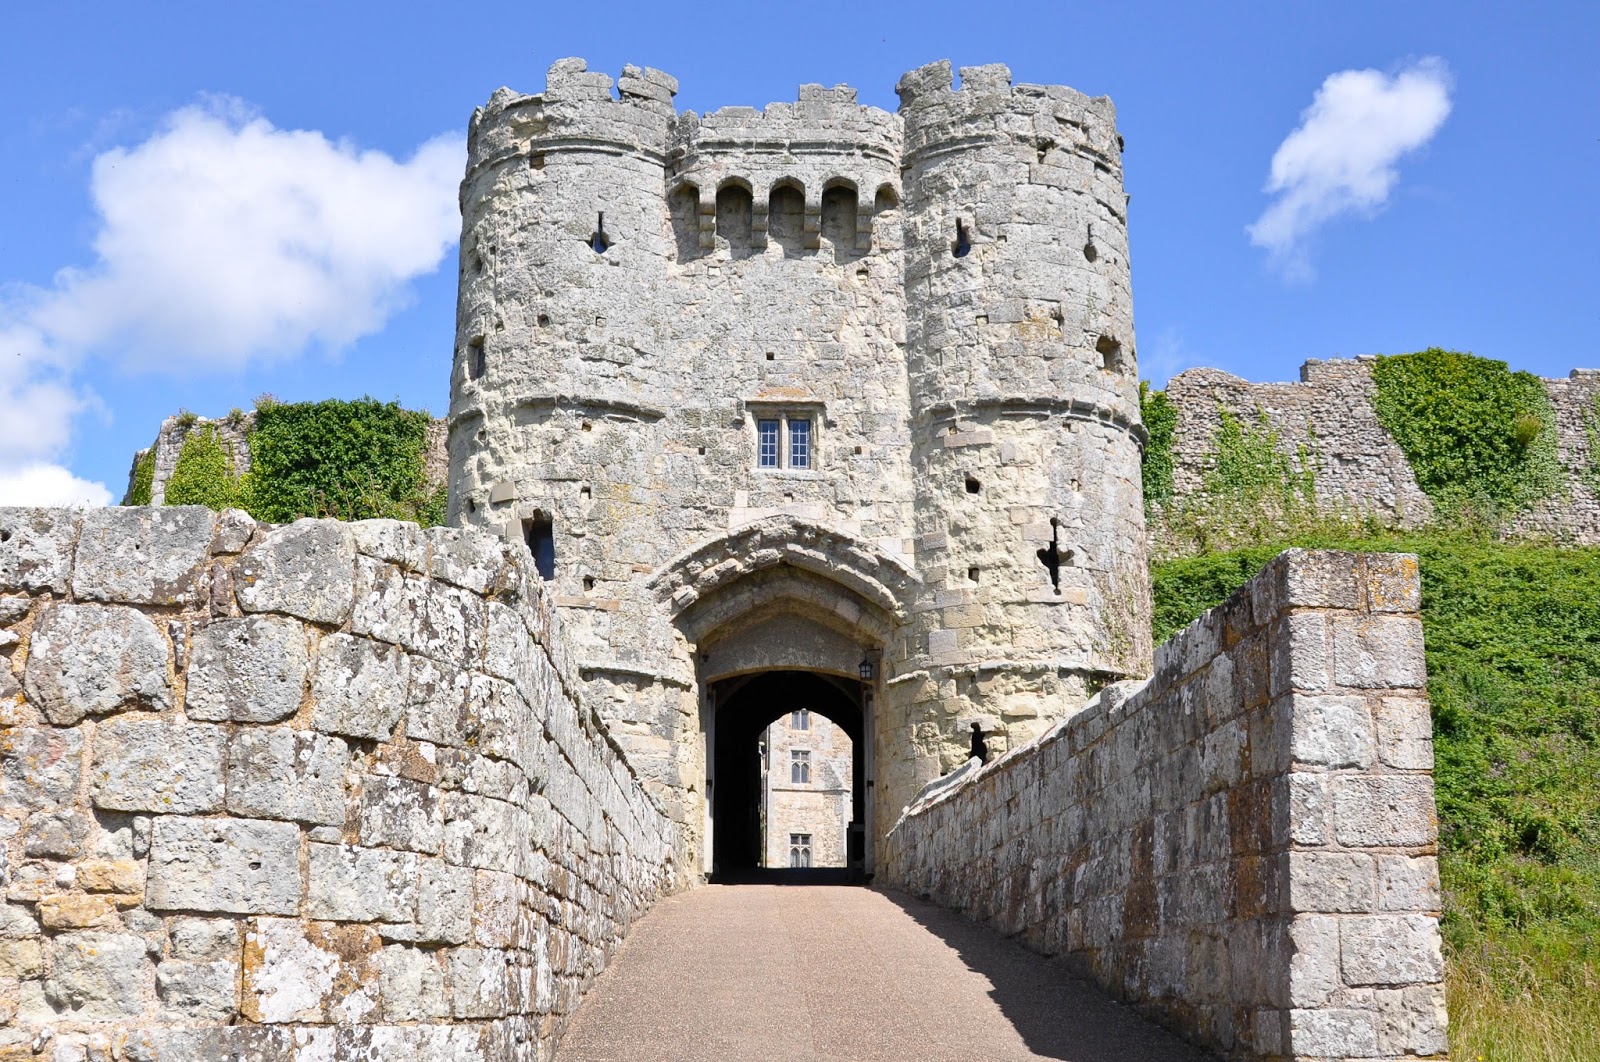 The entrance to the castle, Carisbrook Castle, Isle of Wight, UK - www.rossiwrites.com